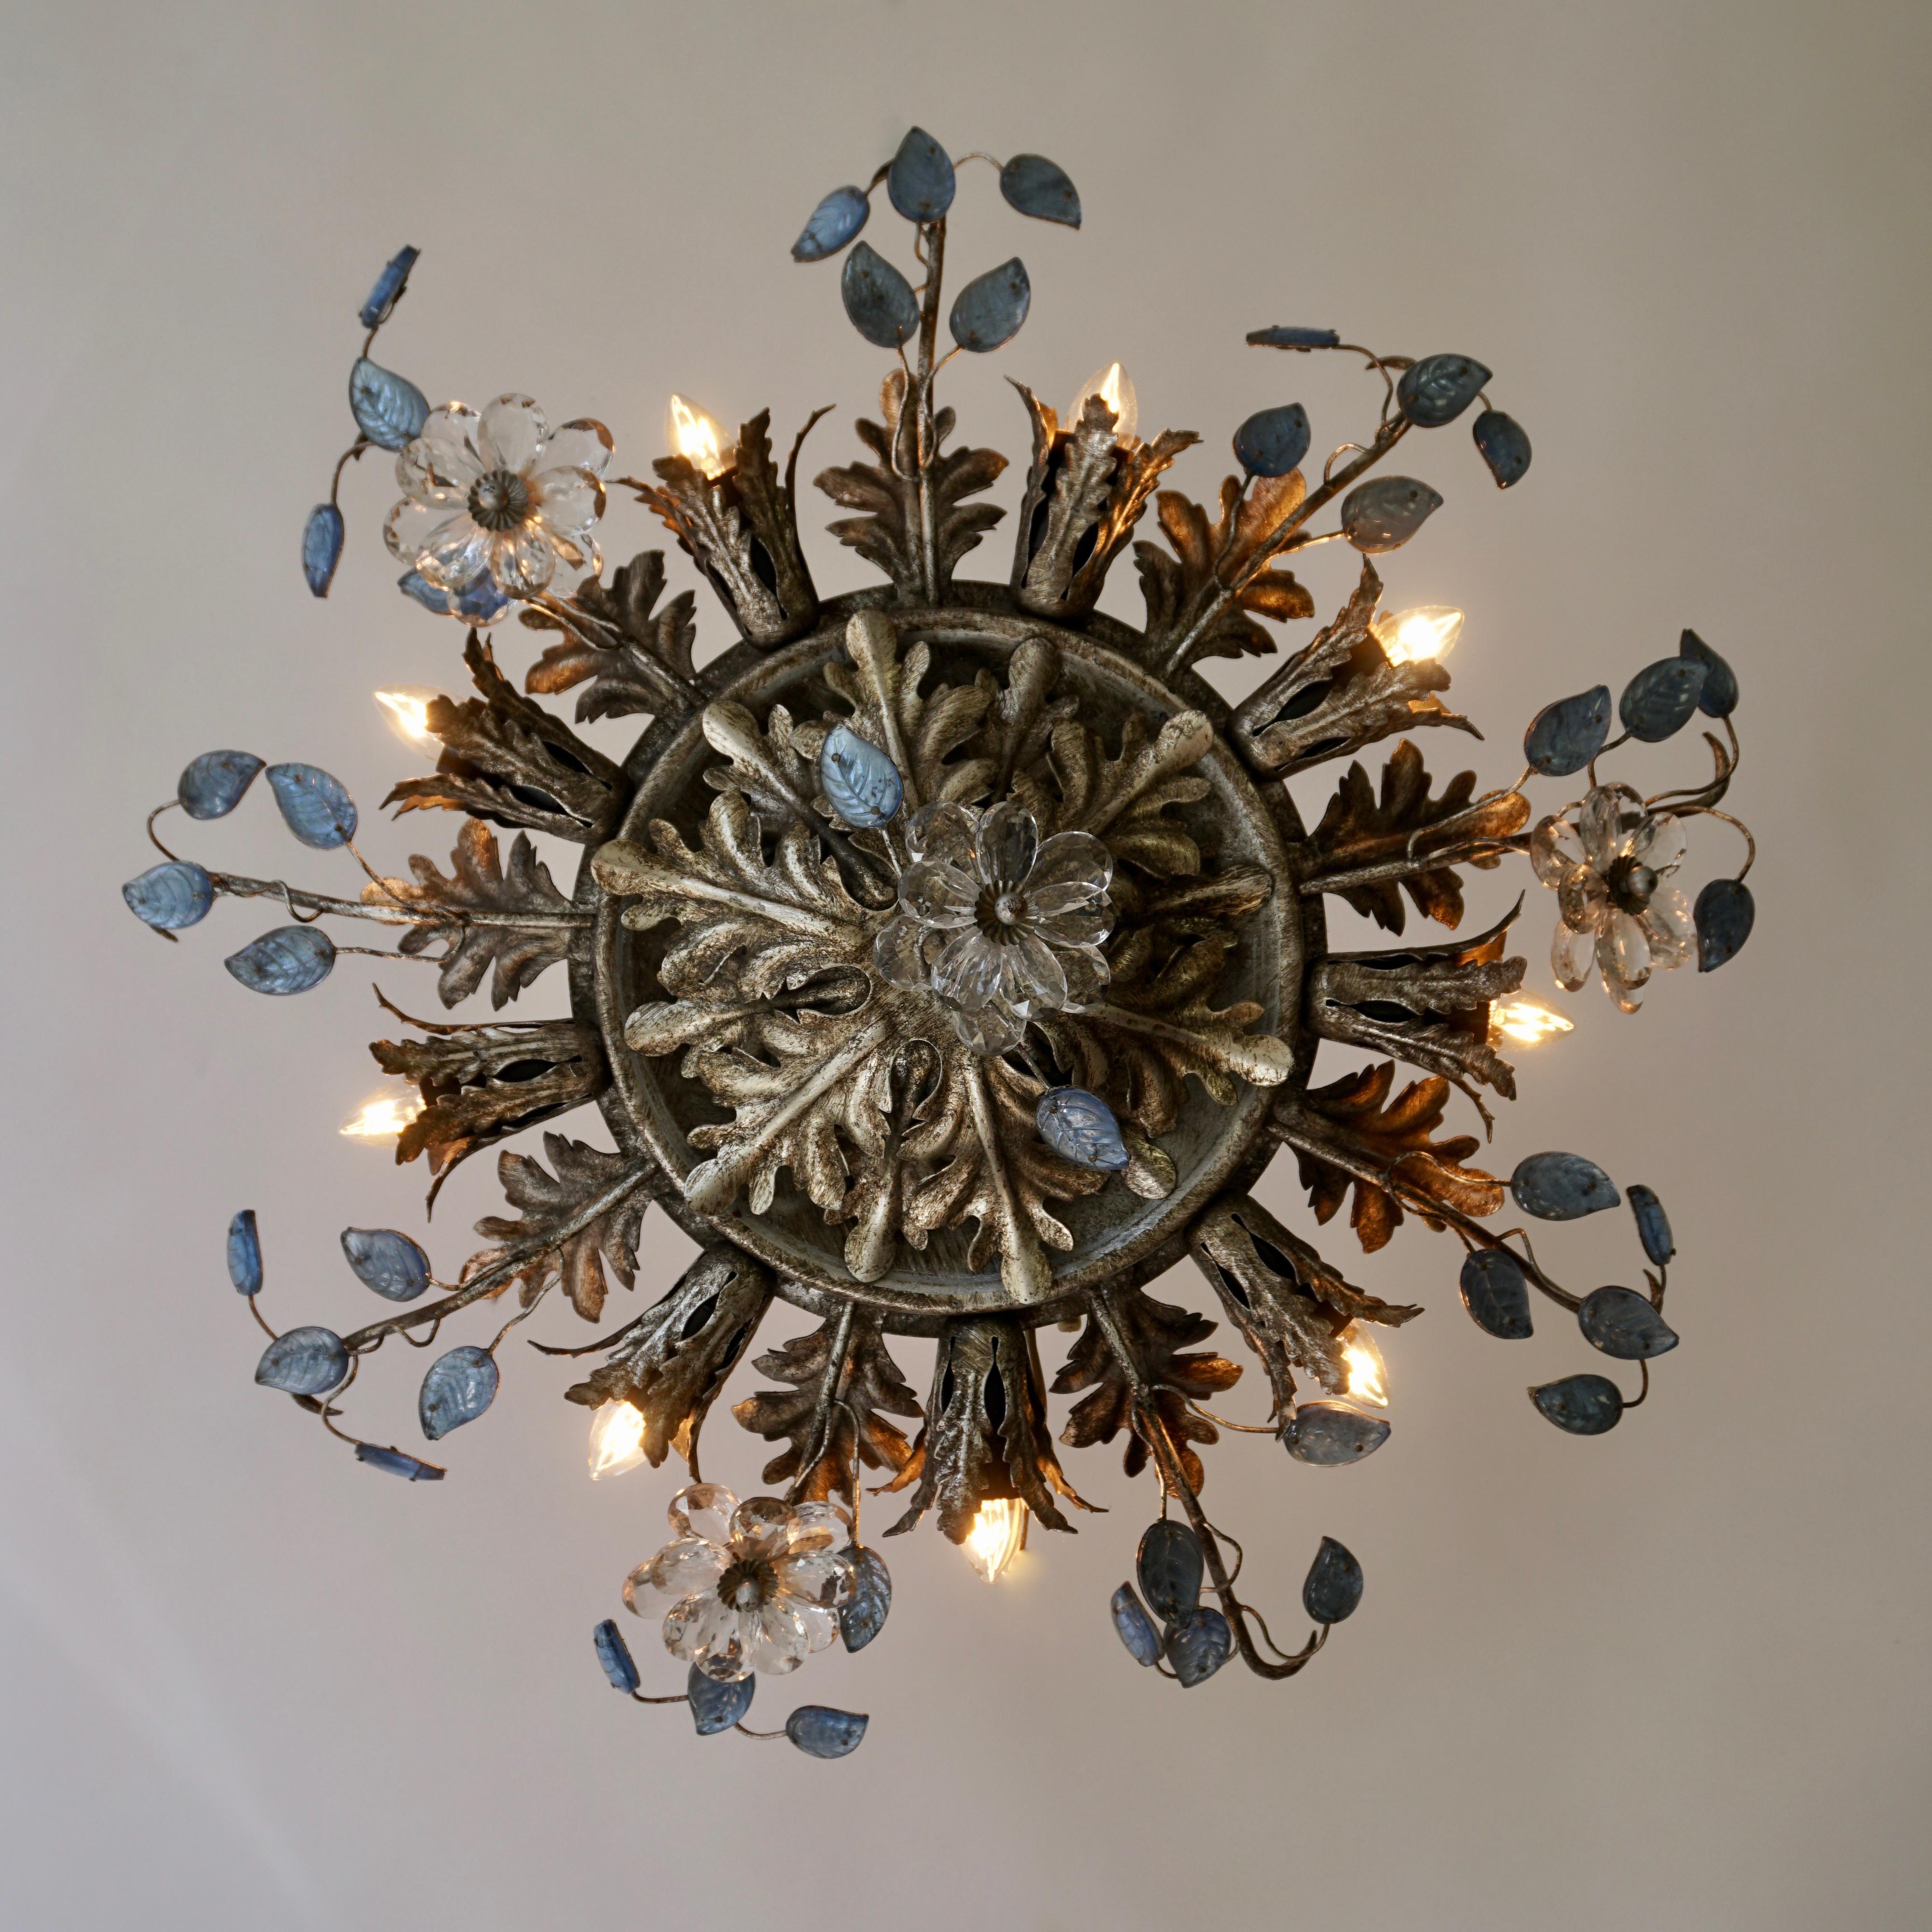 Beautiful flush mount fixture which can be used also as wall sconce - this Italian light with metals leaves, small blue glass leaves and transparent flowers is gorgeous! The light fixture has 9-light bulb holders spread around as a sunburst. With